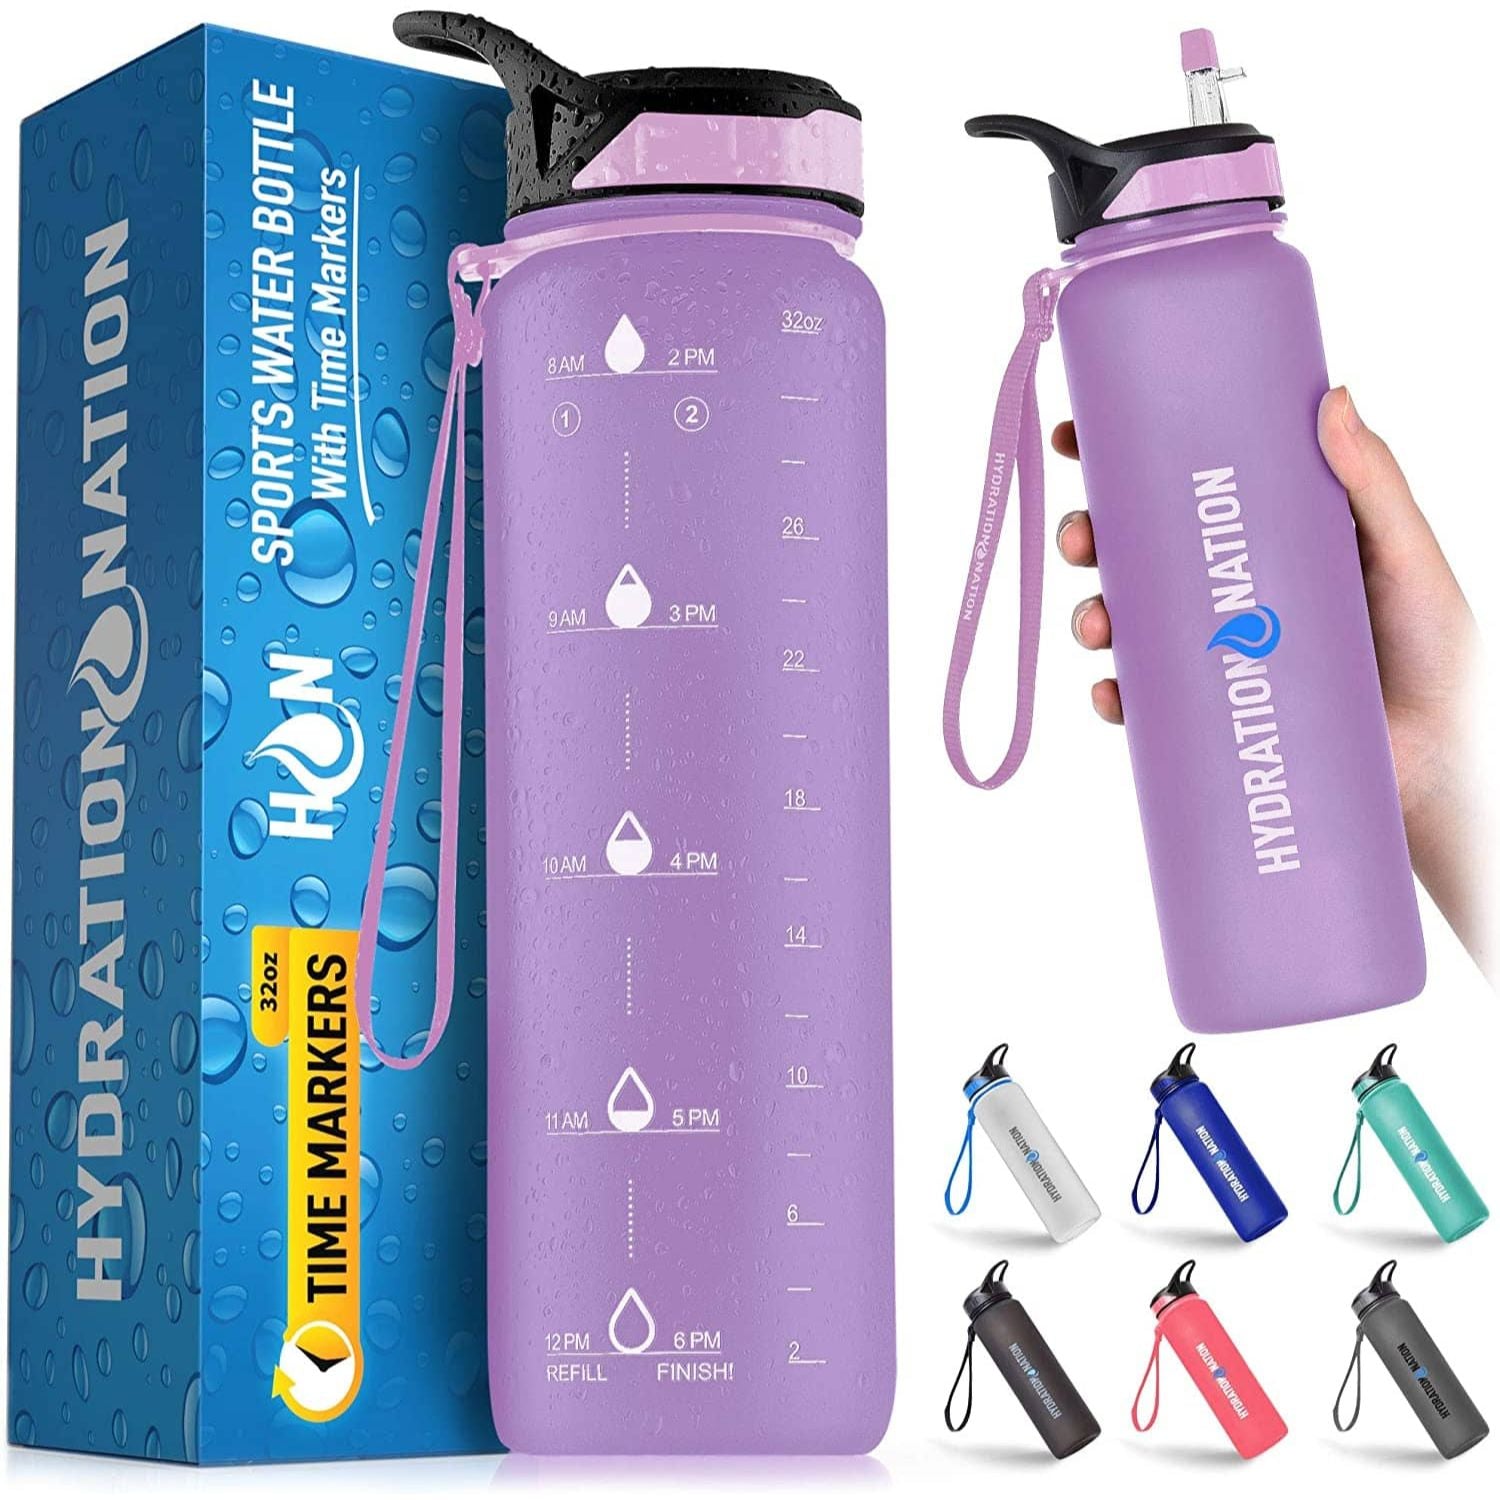 Hydration Nation 1 Gallon Water Bottle with Motivational Time Reminder - Ombre Blue